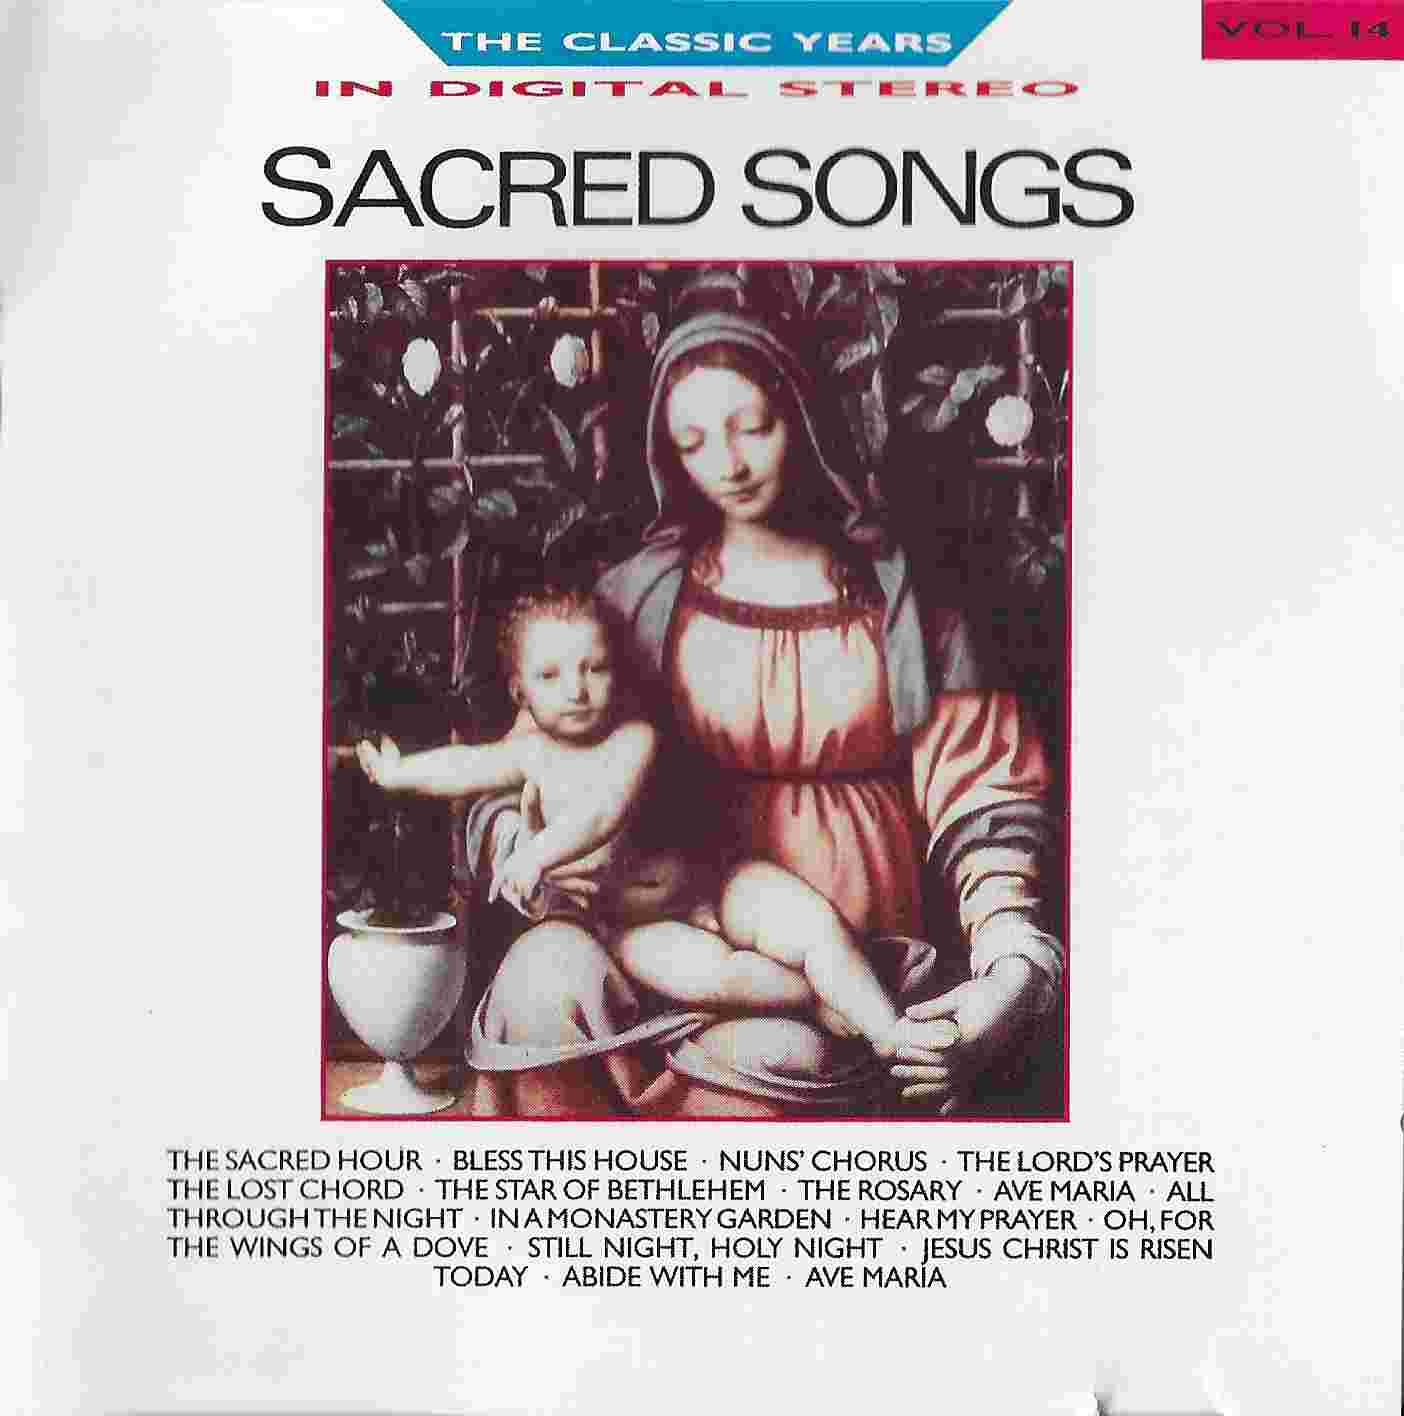 Picture of Songs for a sacred season by artist Unknown from the BBC cds - Records and Tapes library